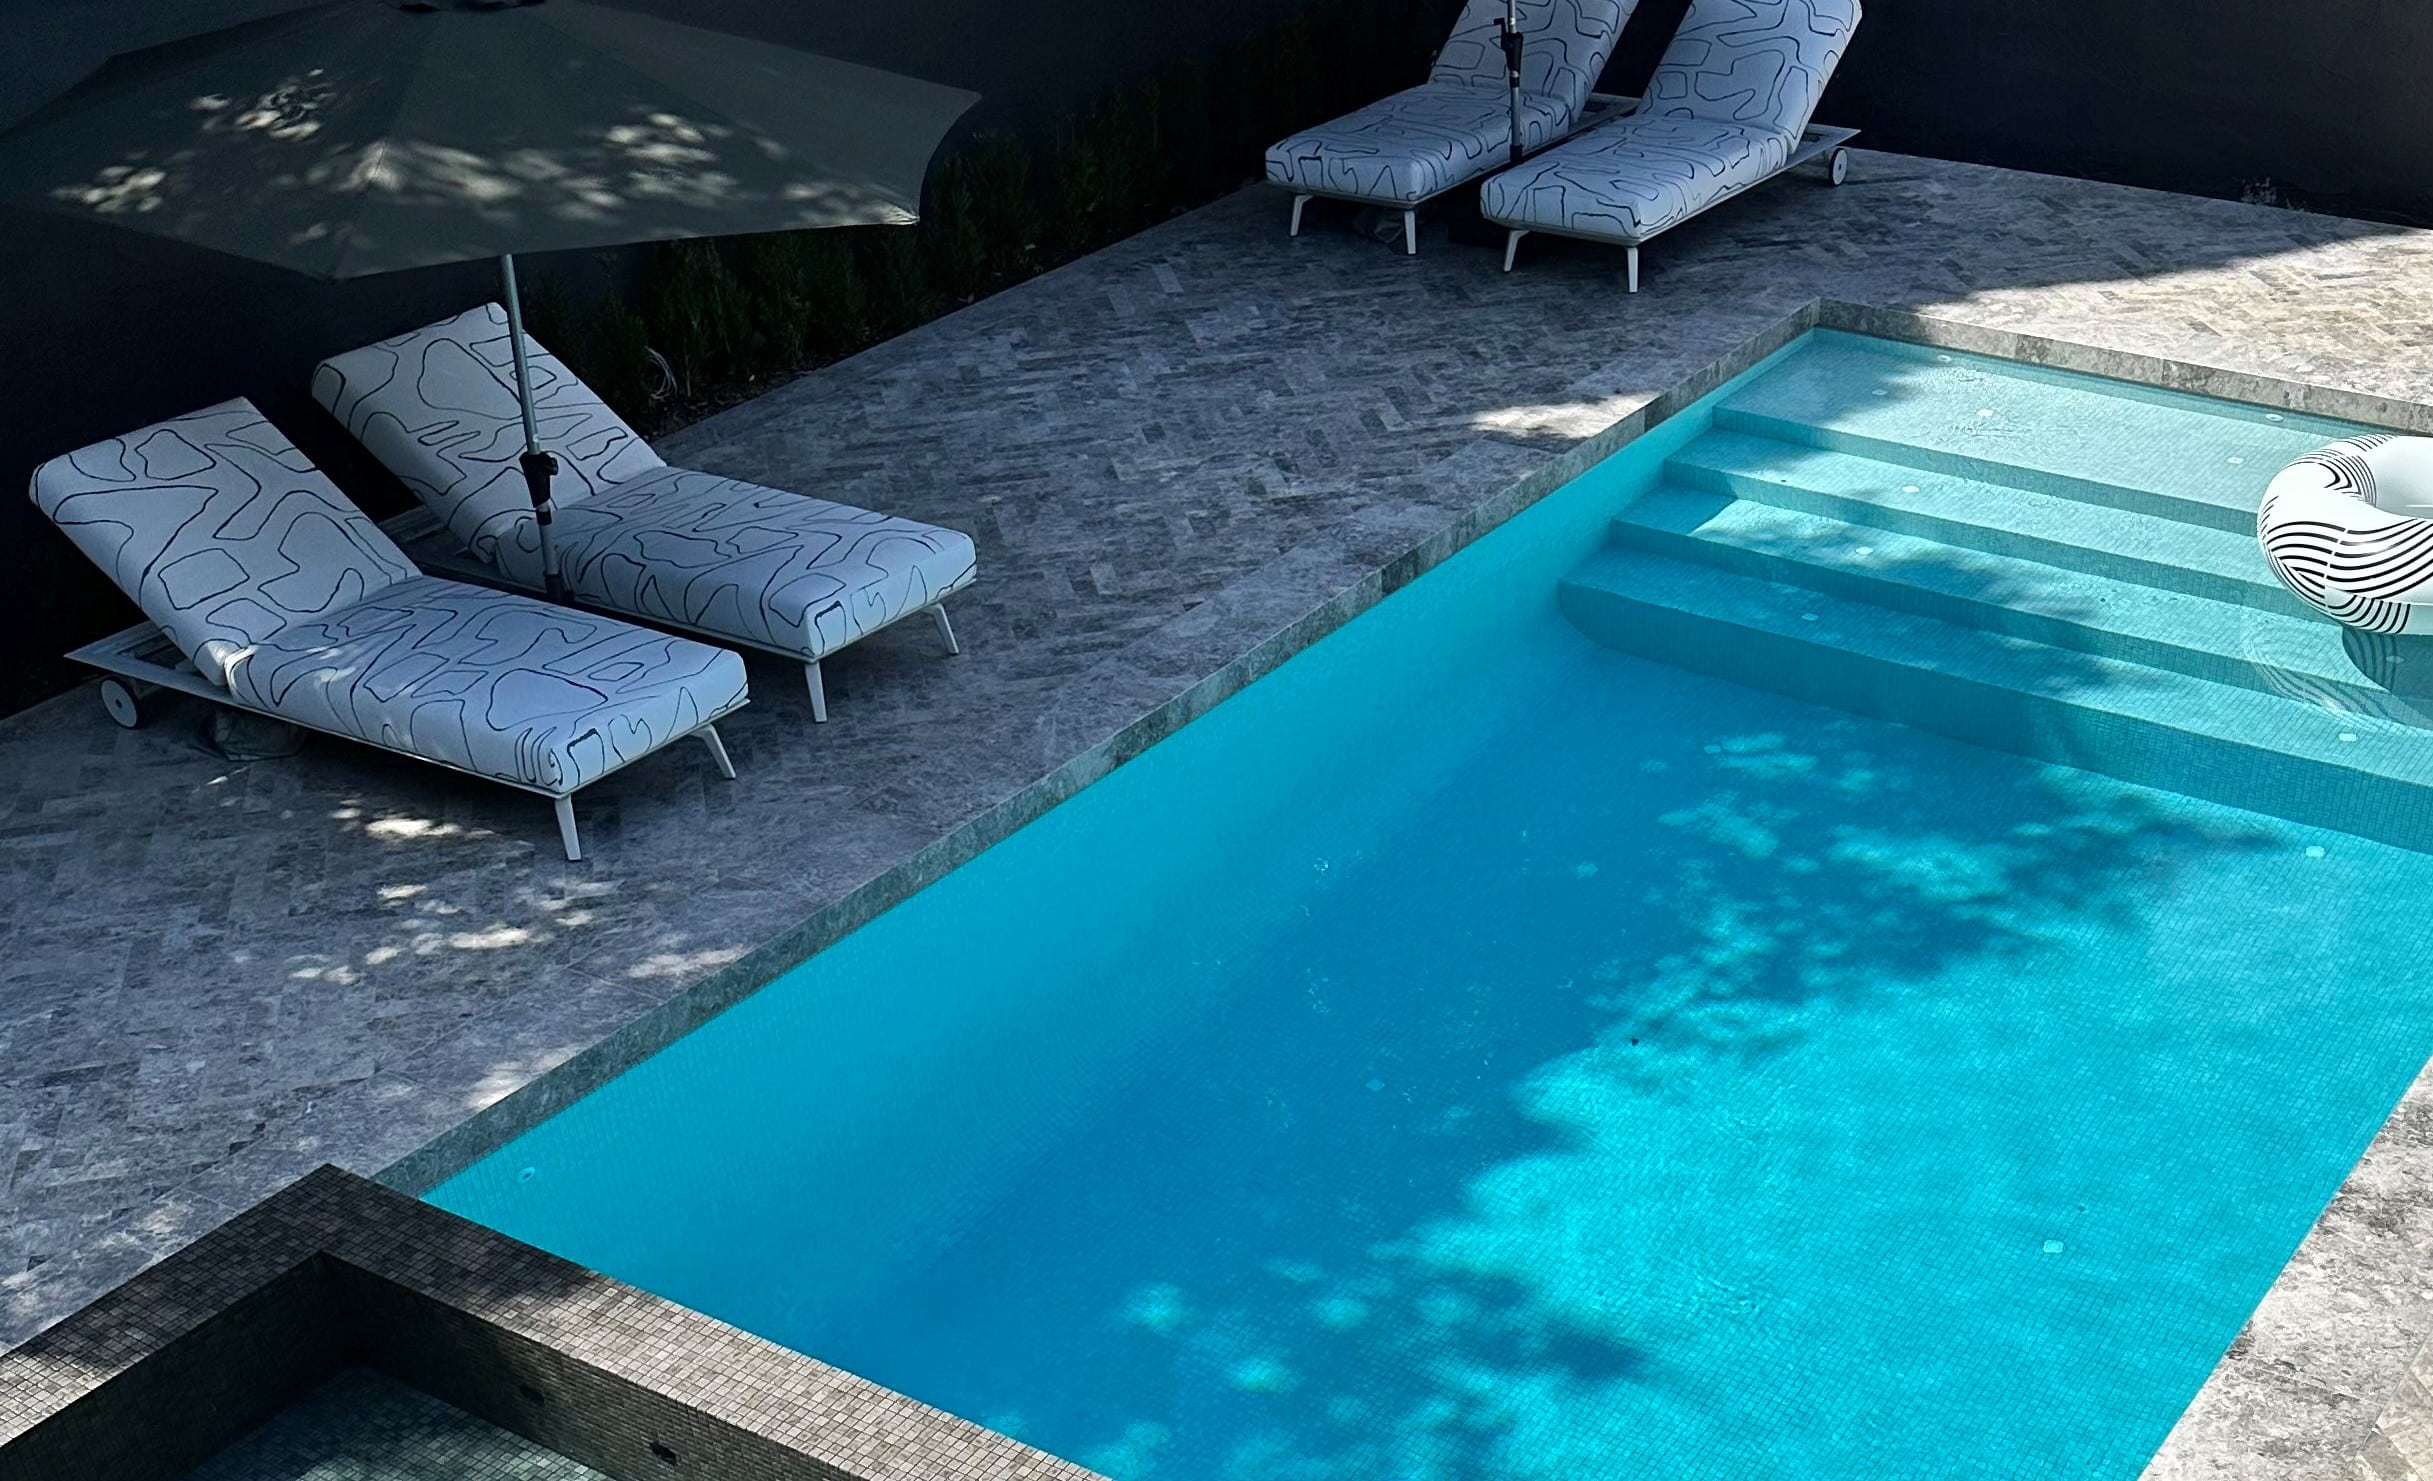 TUNDRA GREY LIMESTONE HONED TILES _POOL COPING TILES AND PAVING_RMS TRADERS_STONE AND TILES SUPPLIER MELBOURNE (86)X